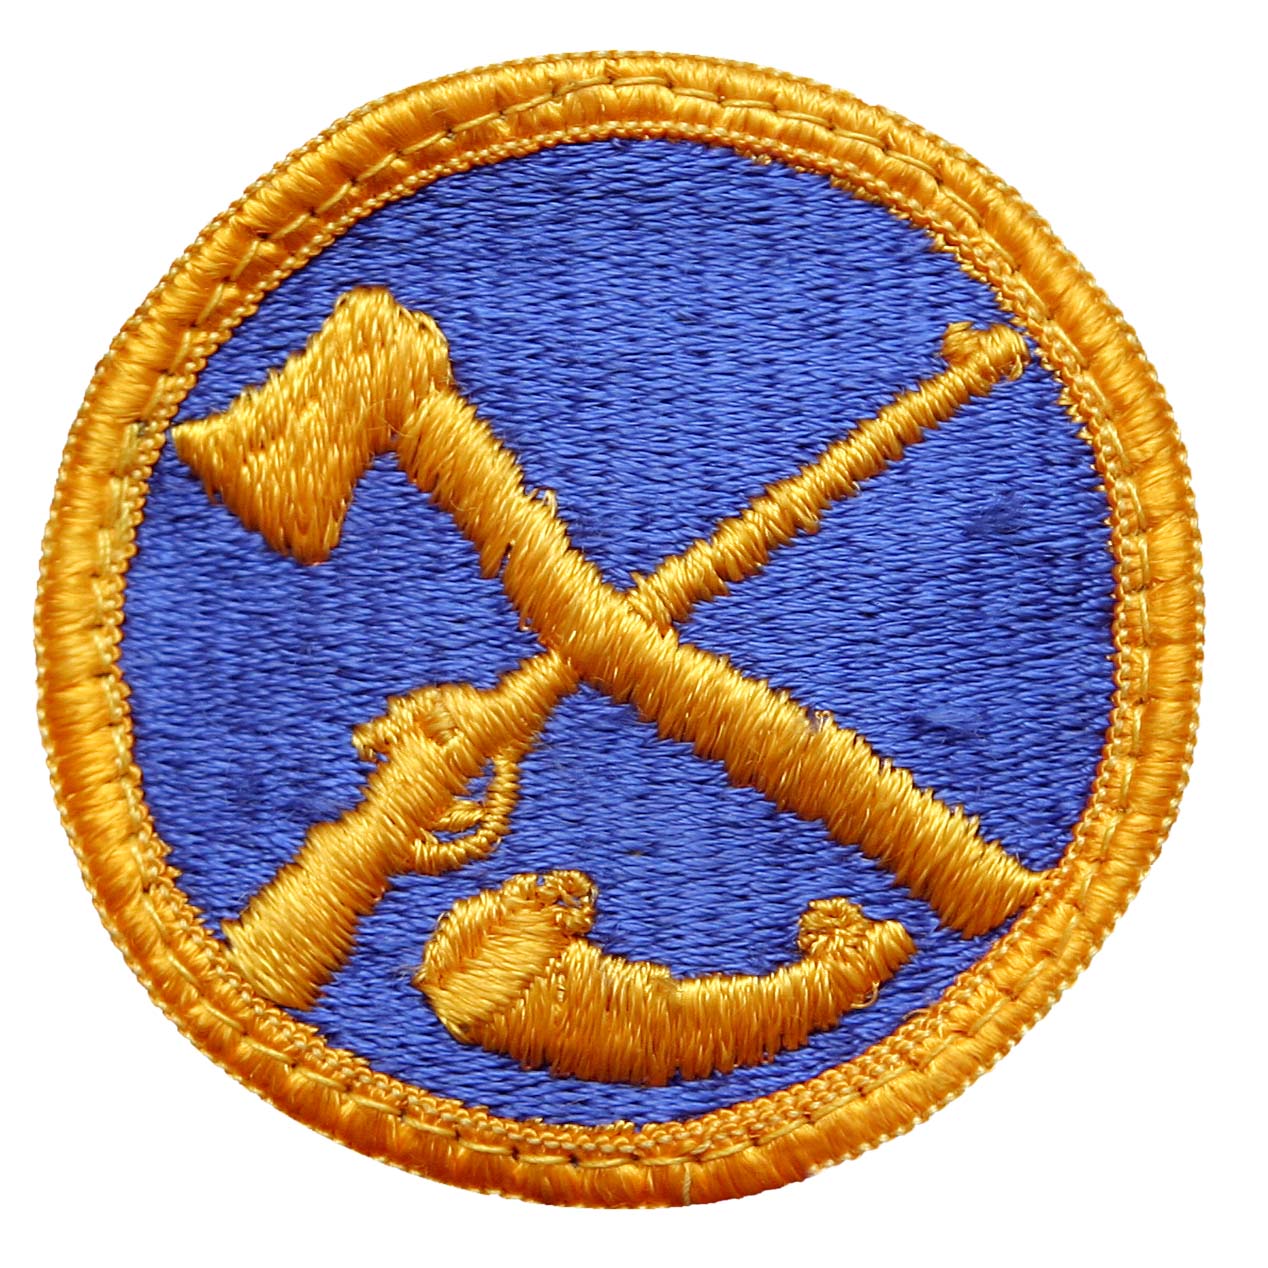 What’s the most awesome or absurd military unit patch you’ve seen?